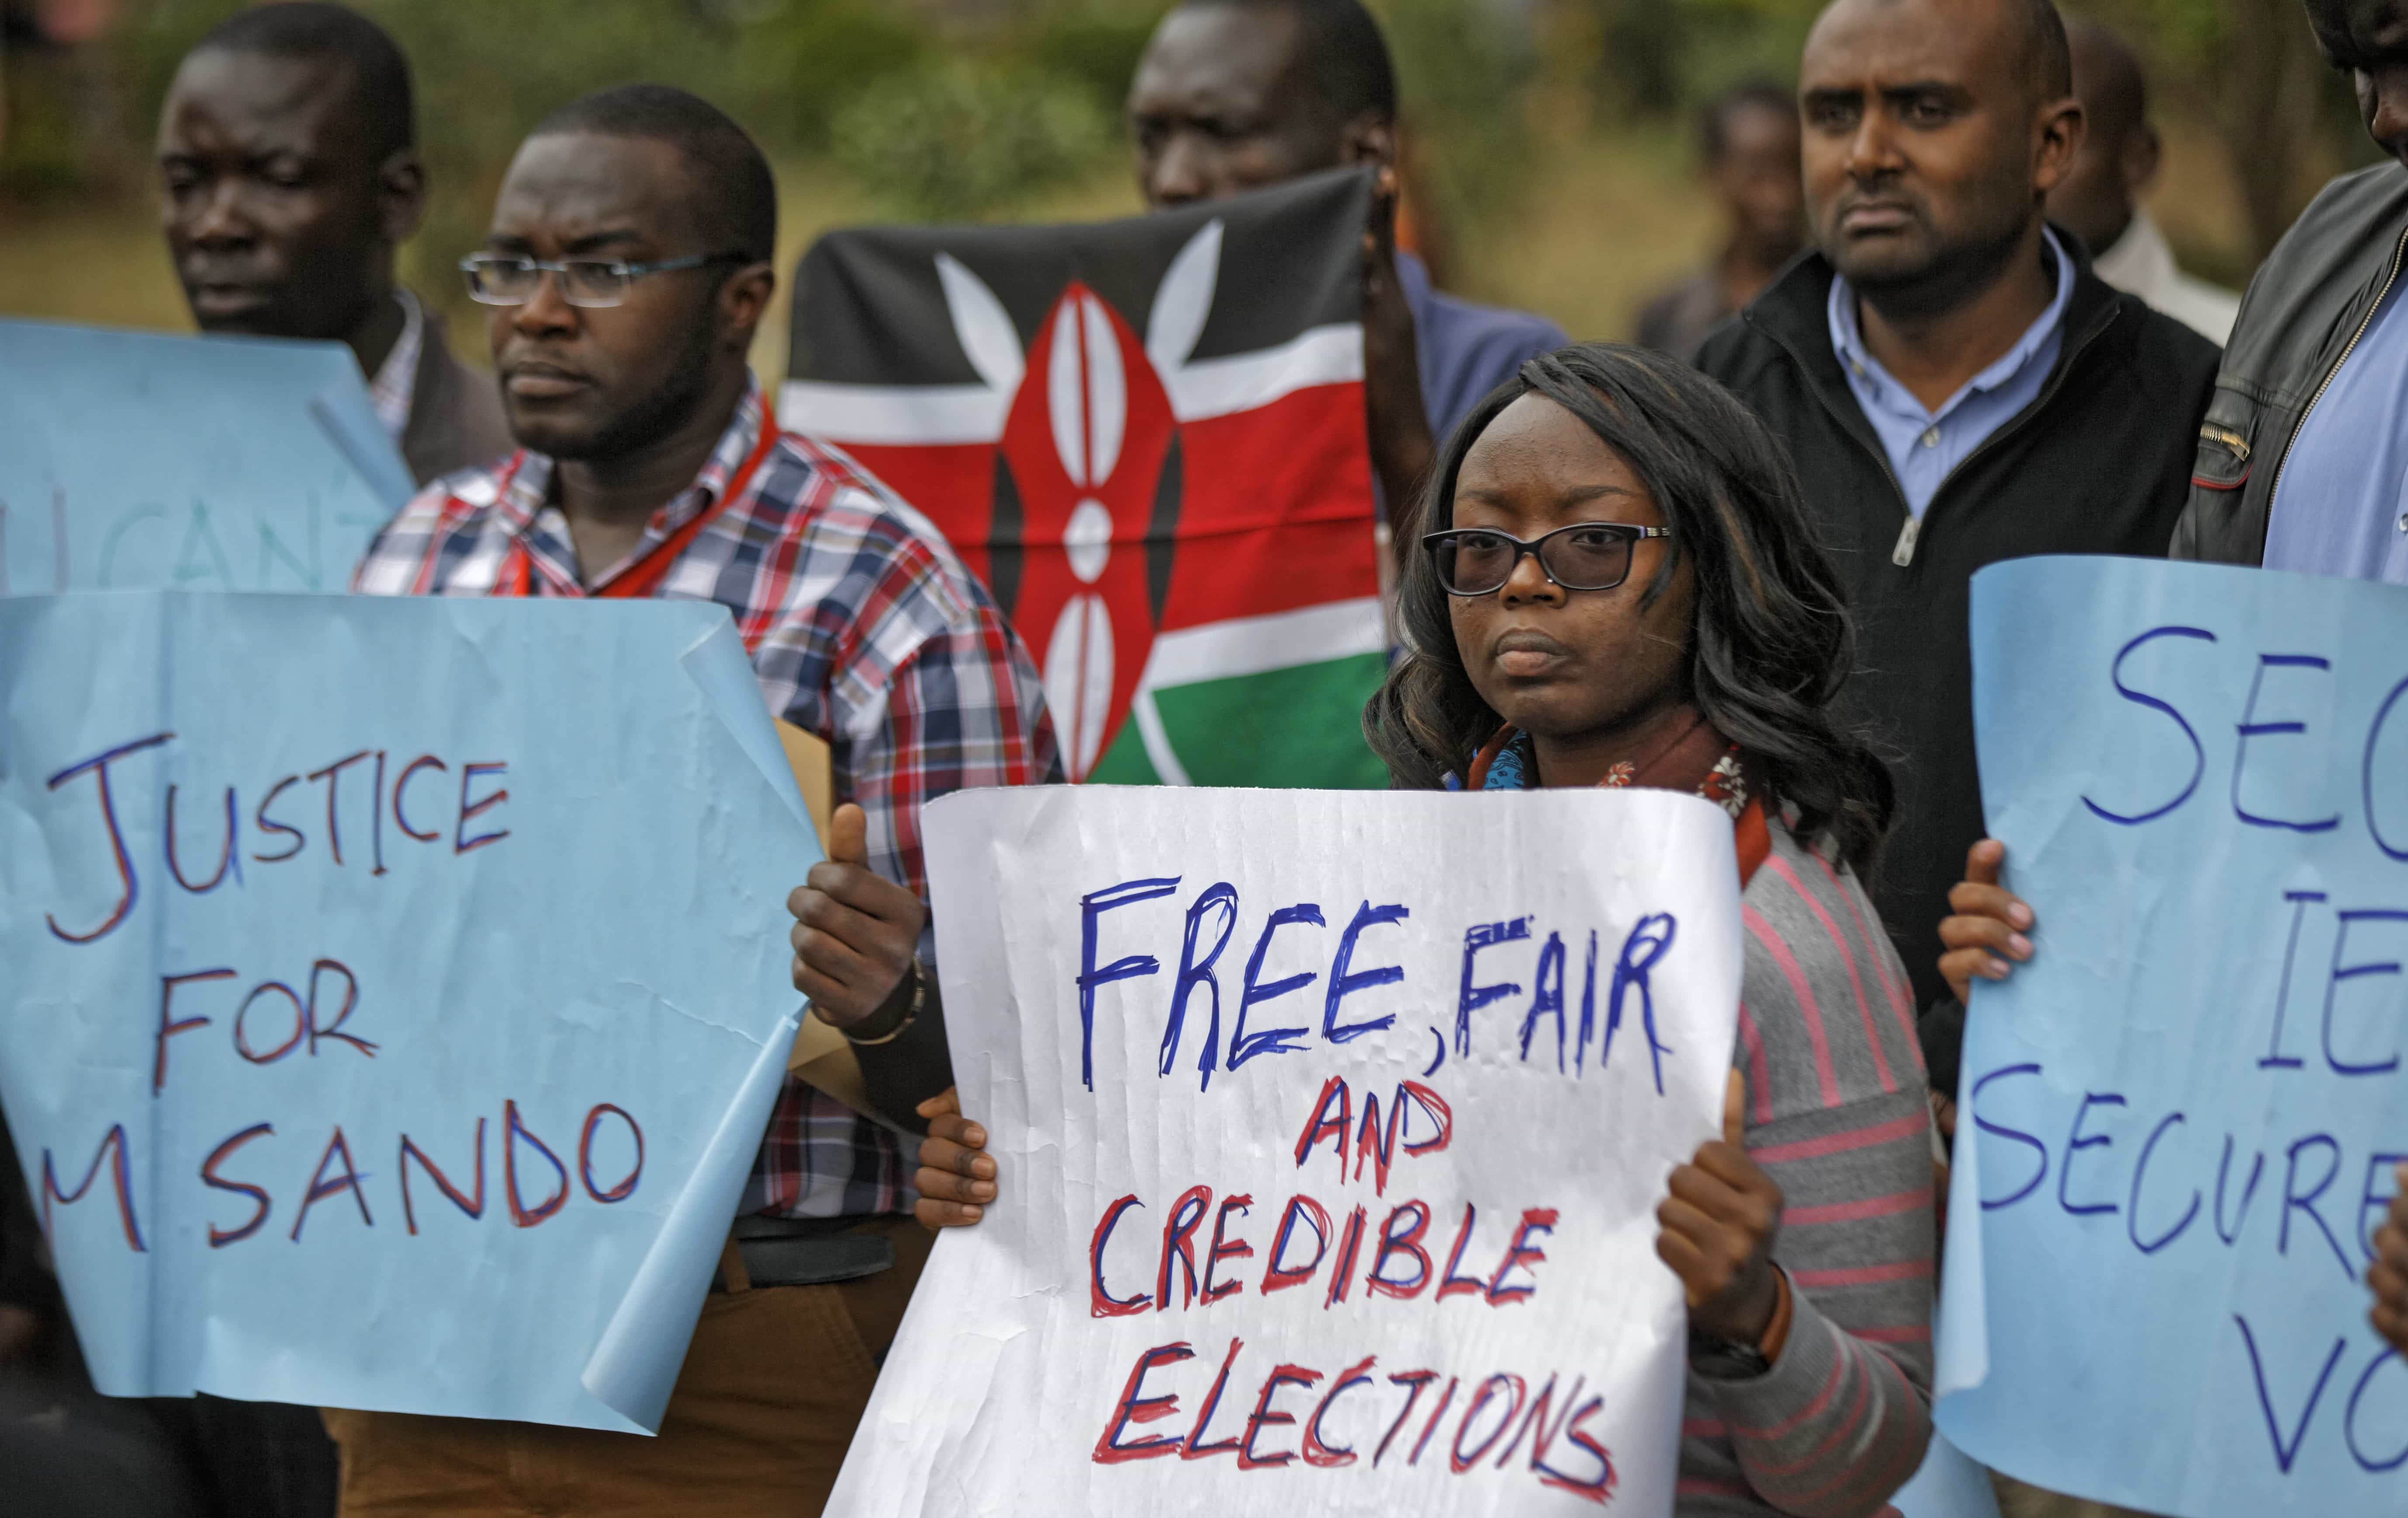 Members of civil society groups protest the killing of electoral commission information technology manager Christopher Msando, at a demonstration in downtown Nairobi, 1 August 2017, AP Photo/Ben Curtis